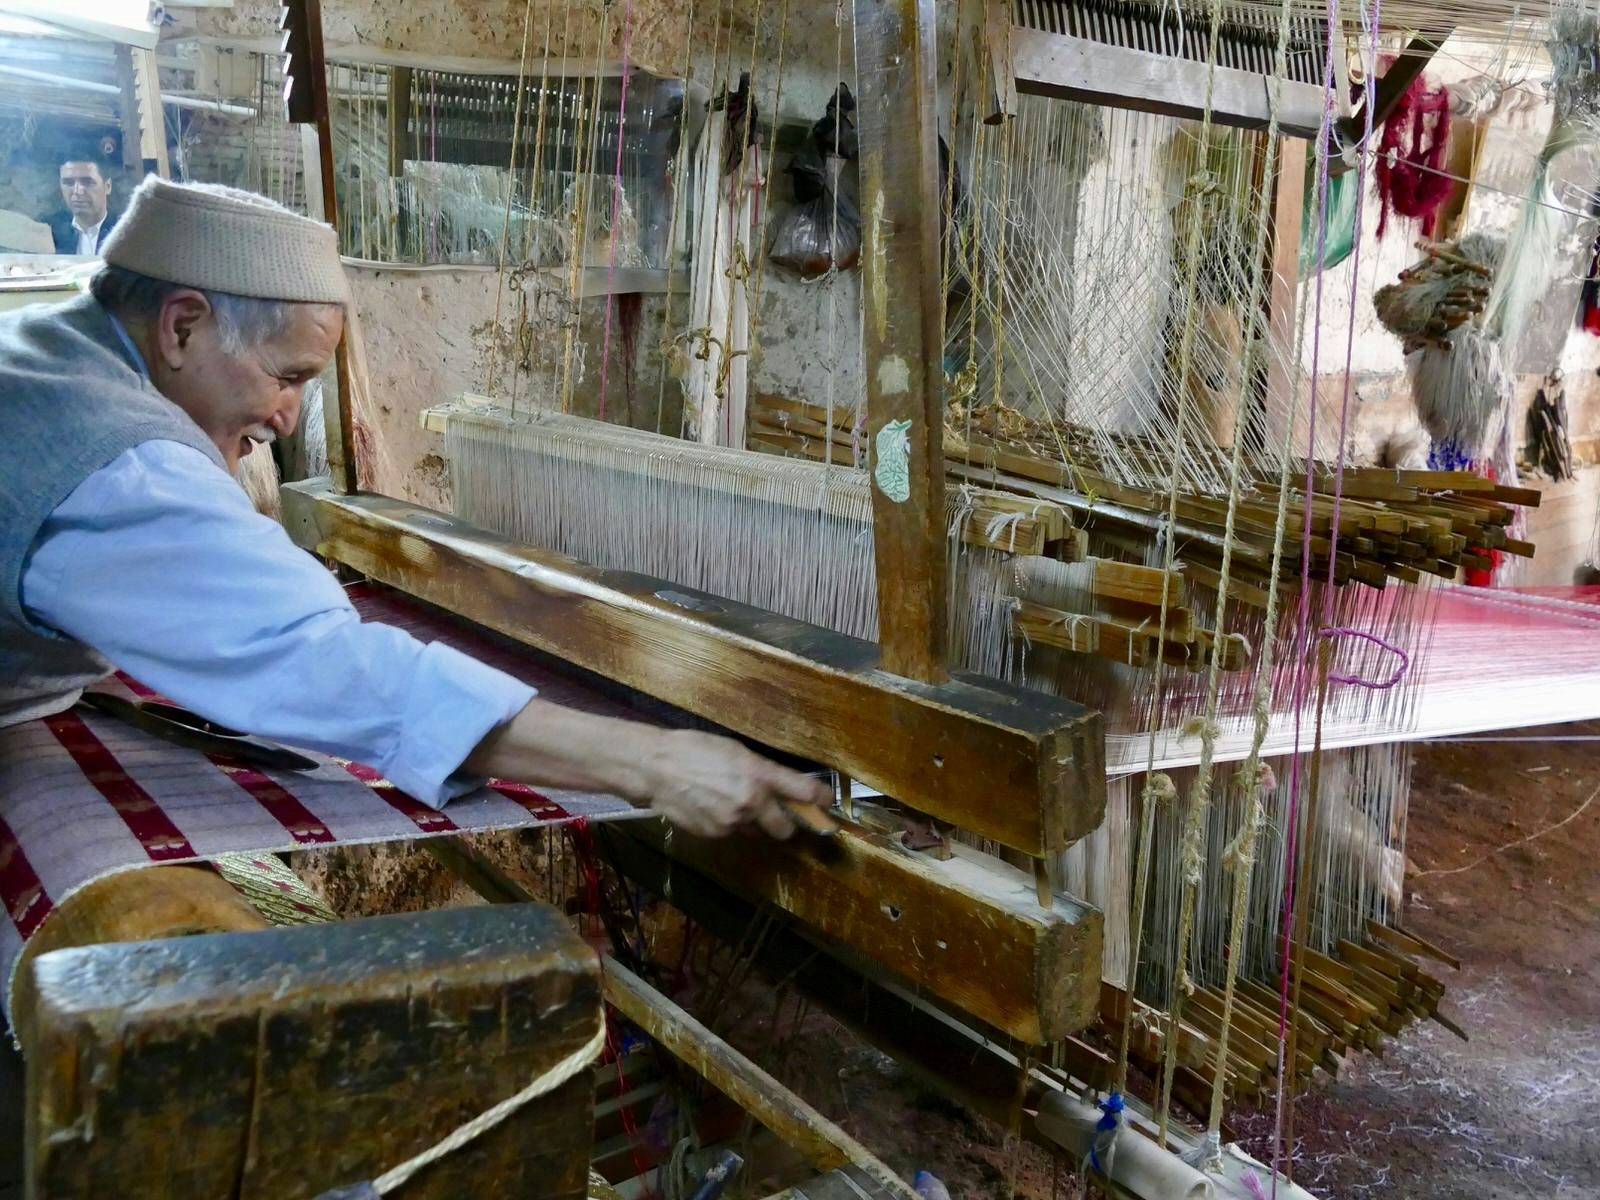 Abdelkhader El Ouazzani works at his loom, which travellers can watch as part of the Culture Vultures tour in Fez, Morocco